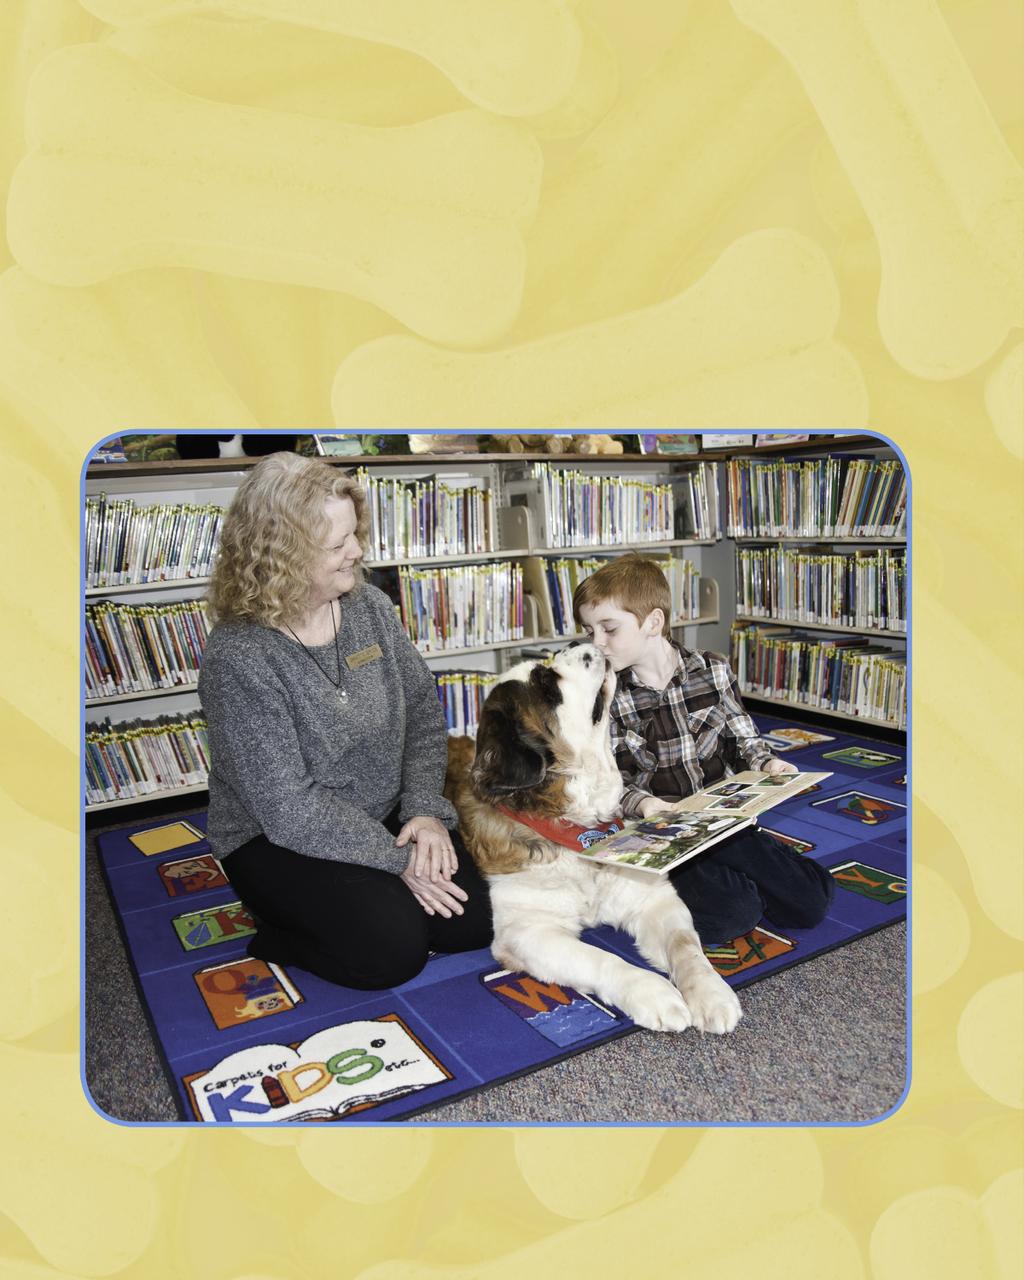 A Good Listener Janette Grice is the director of the Interlochen Public Library. She says Katie helps kids feel comfortable and welcome when they come to the library.